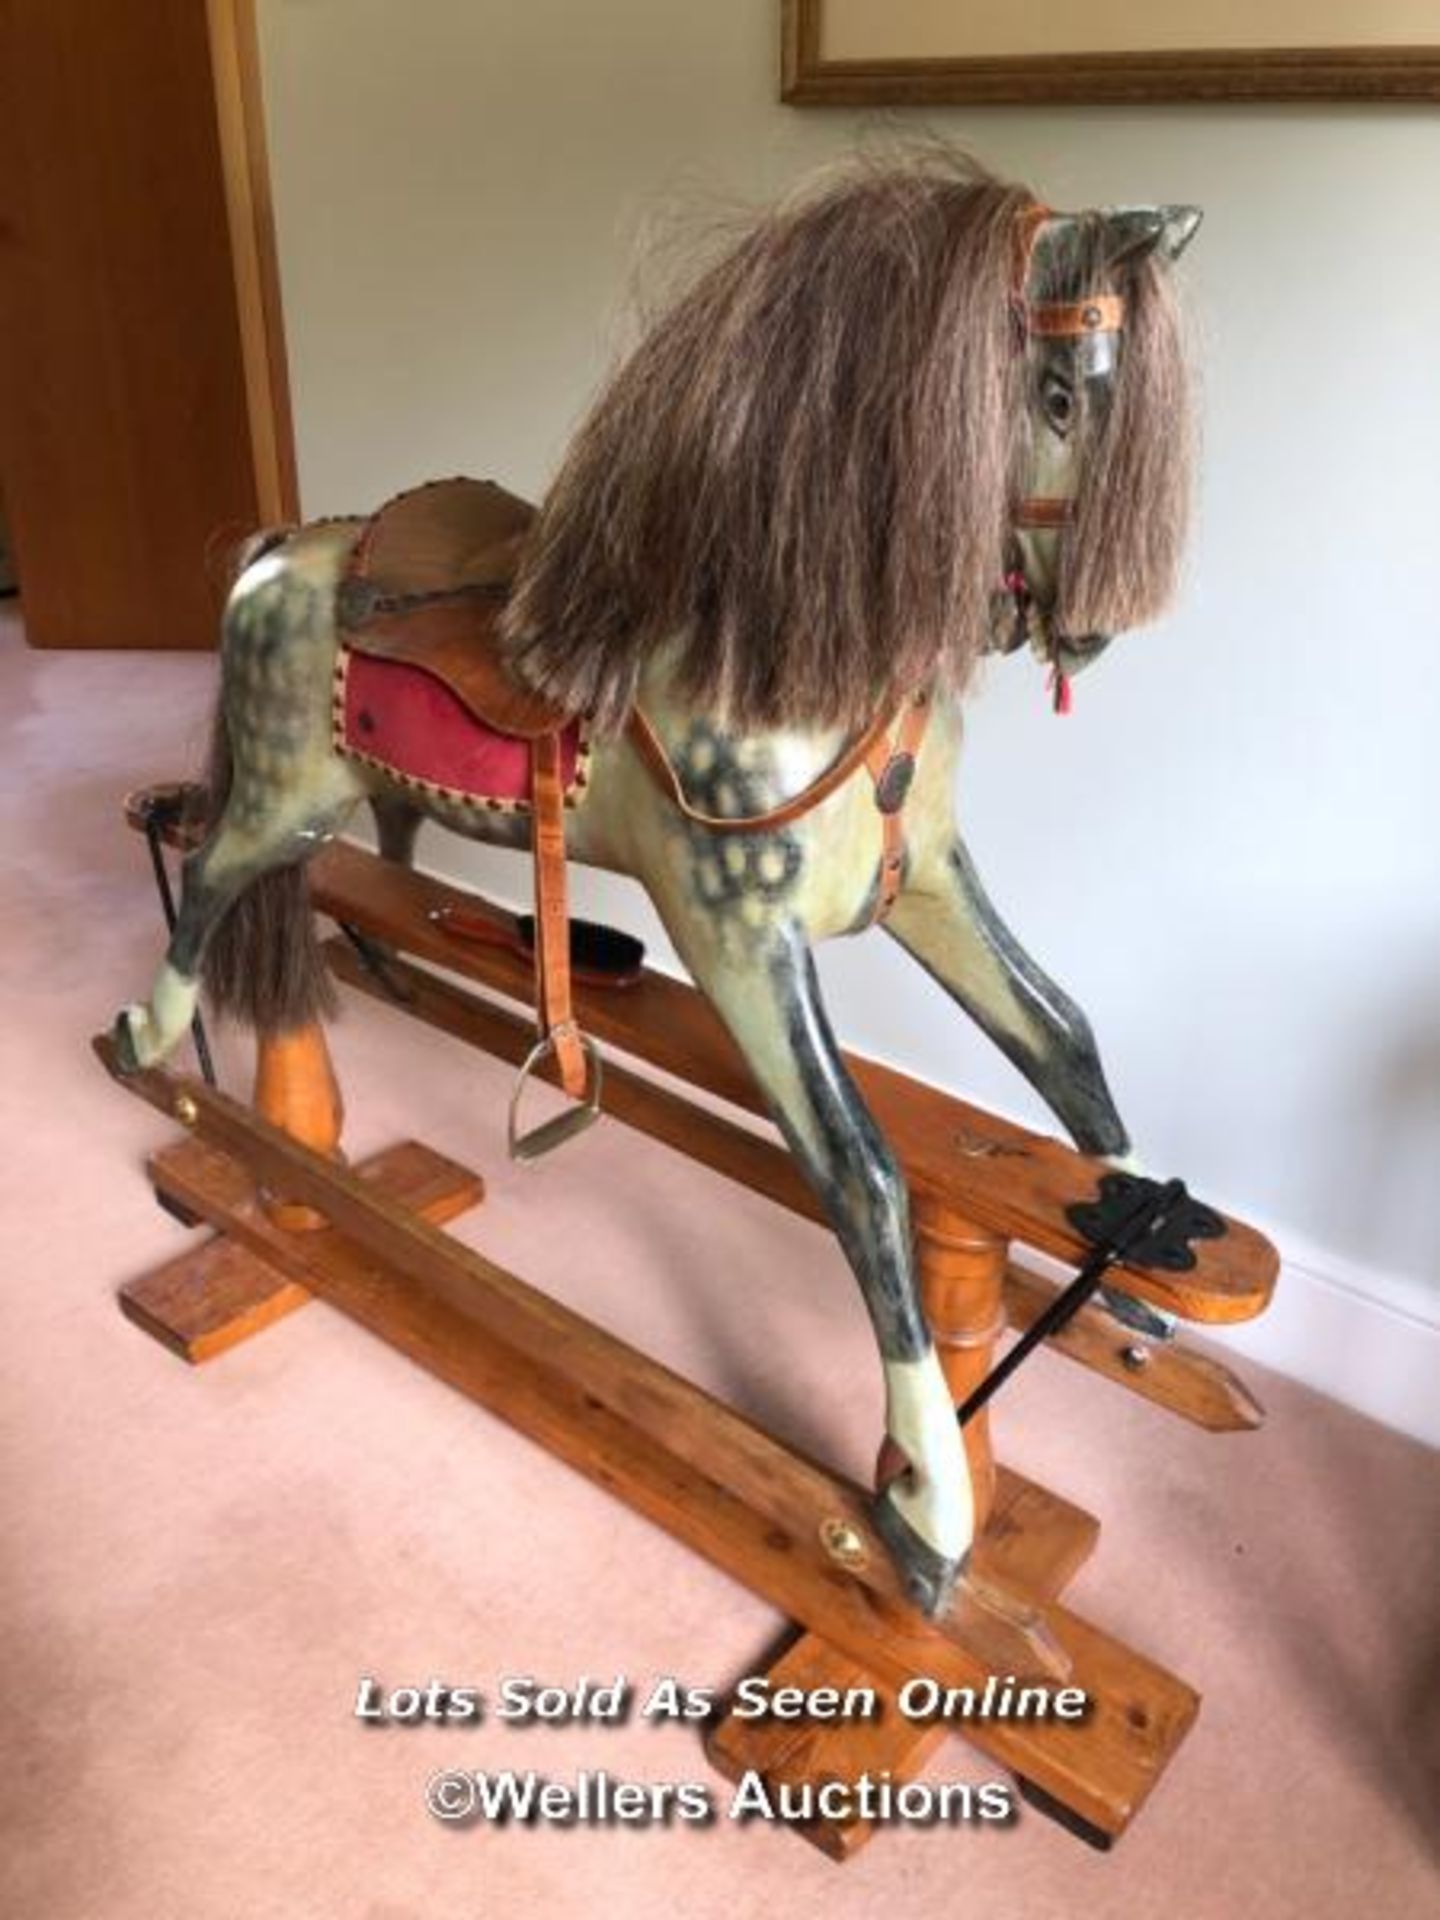 ANTIQUE ROCKING HORSE, BY F.H. AYRES LONDON C1910 - 1920, RESORED IN 1990, 128 X 40 X 110CM,